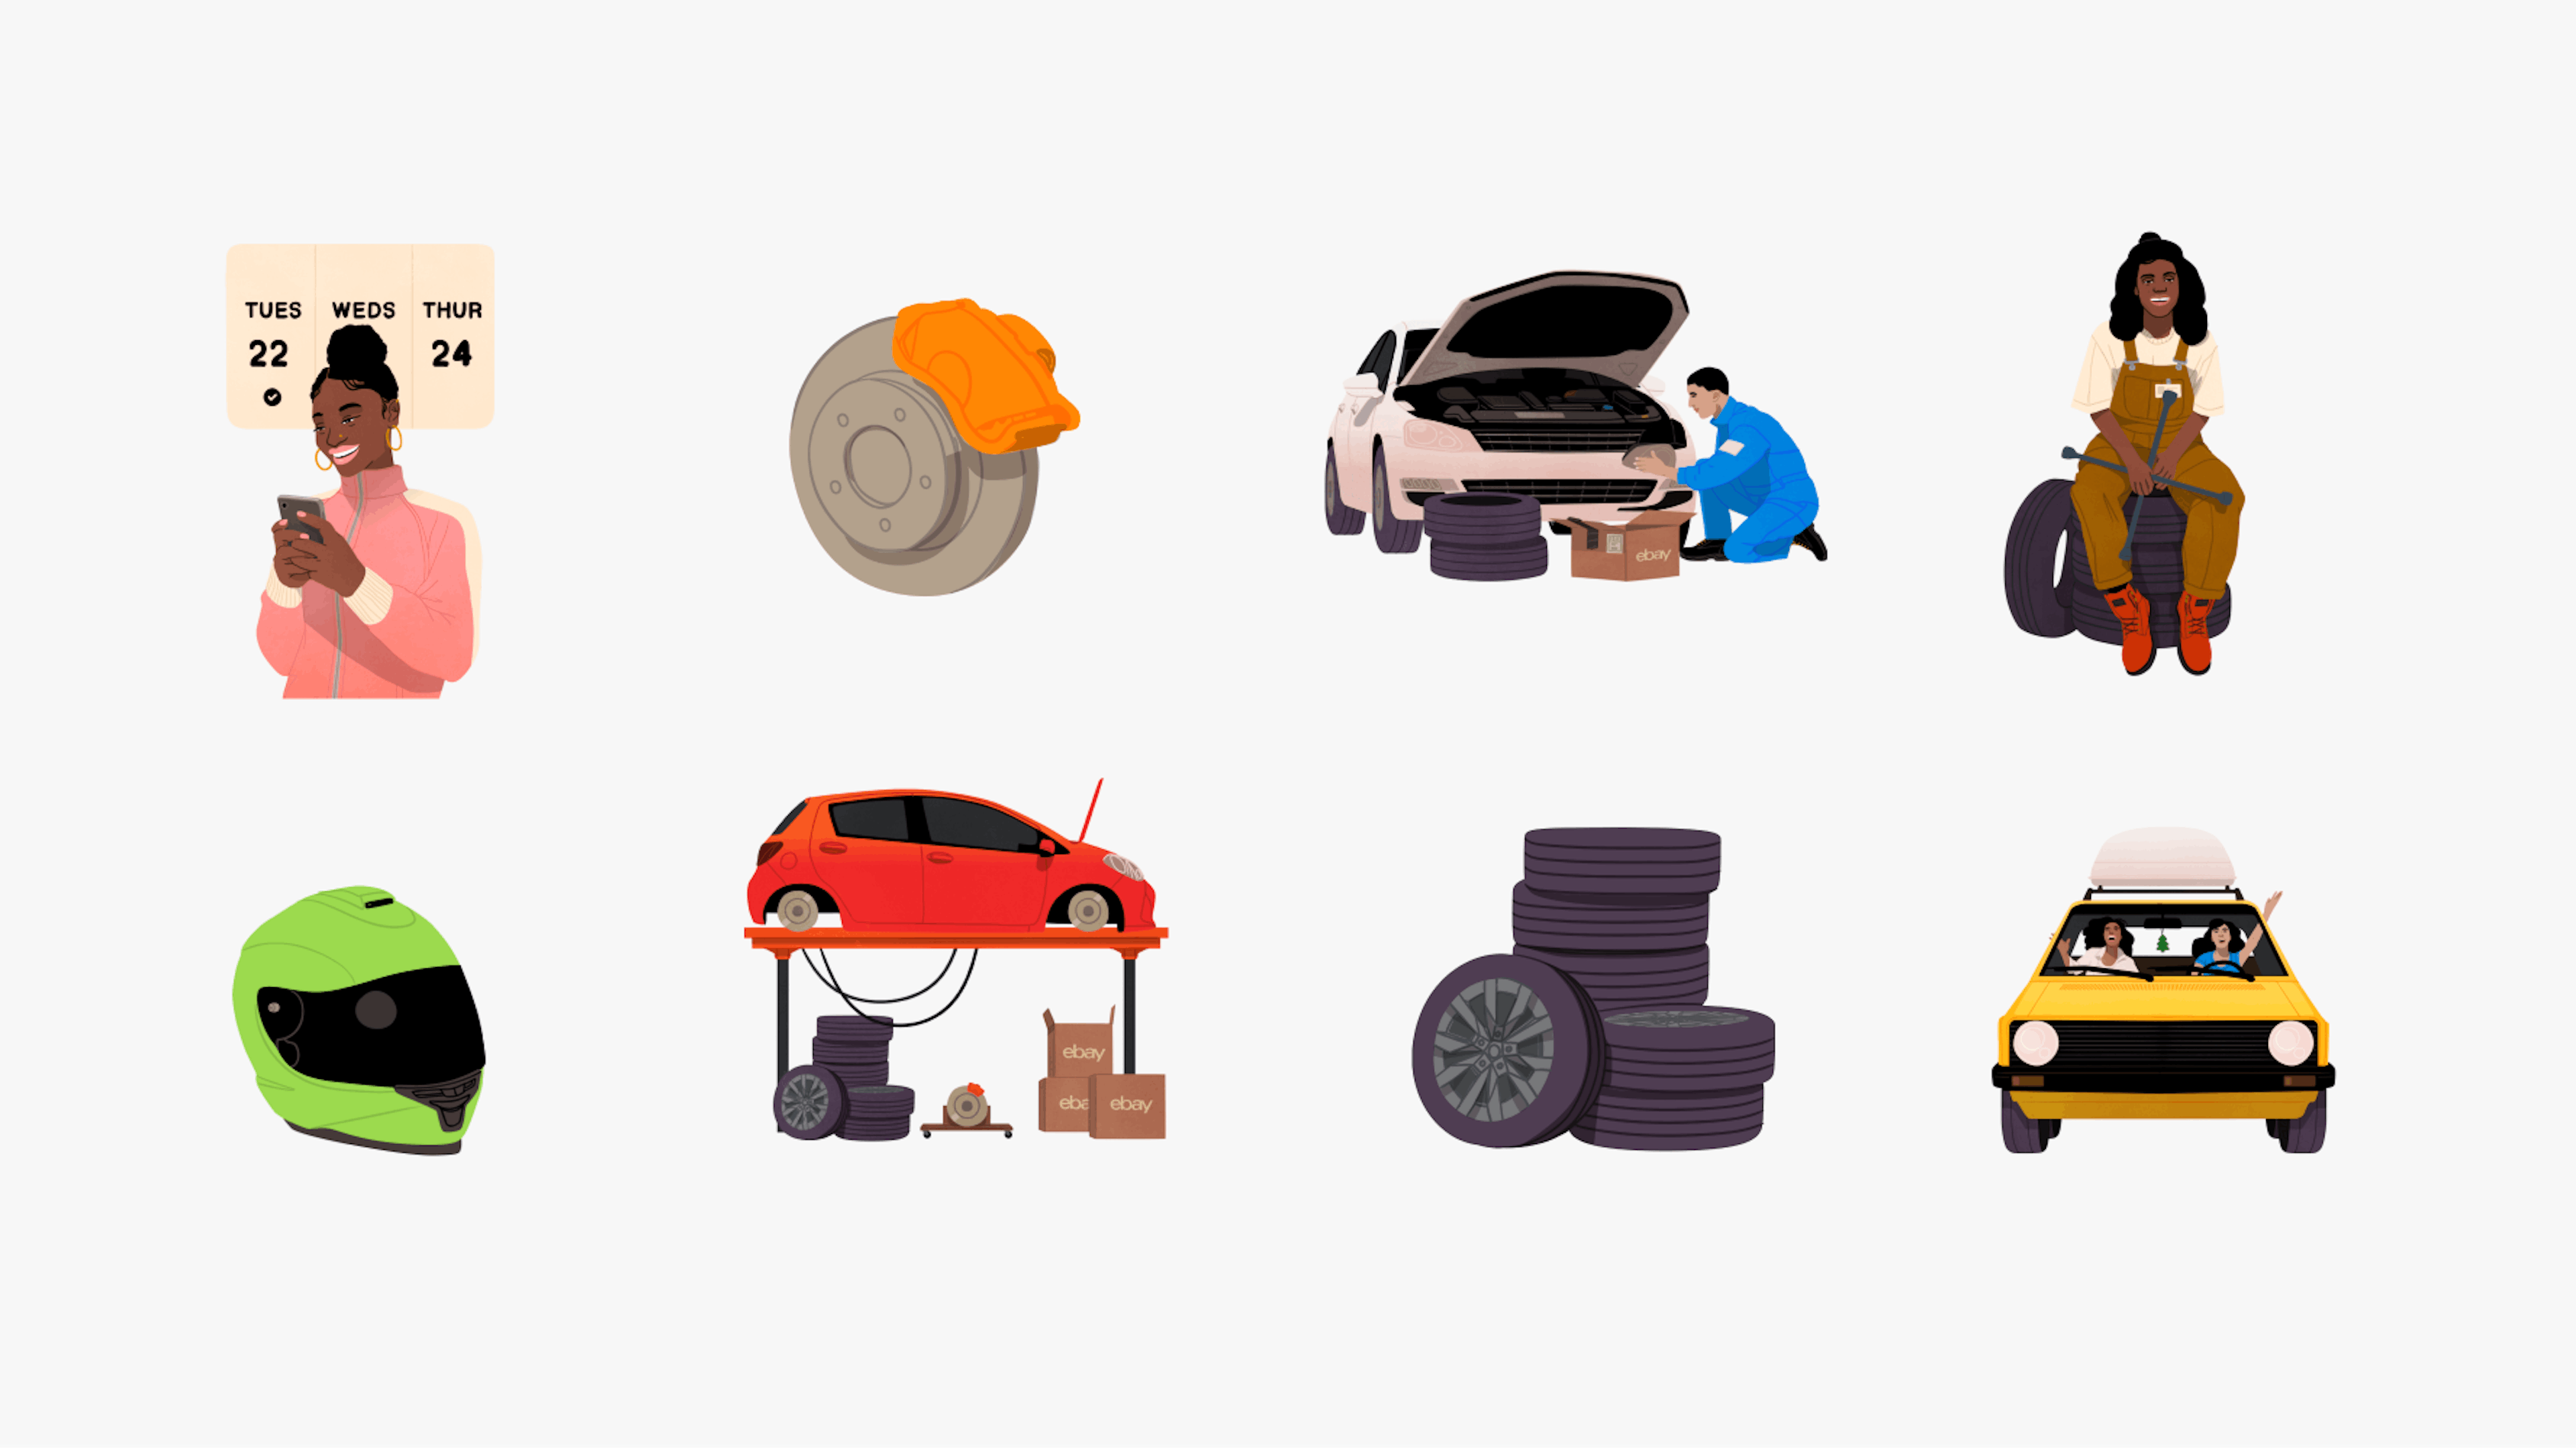 8 distinct illustrations highlighting the motors category:
A woman in a pink sweater is looking at her phone next to a calendar showing Tuesday the 22nd, Wednesday the 23rd, and Thursday the 24th.
A brake disc and caliper.
A person in a blue jumpsuit is working under the hood of a white car, with tires and an eBay box nearby.
A woman in overalls and red boots is sitting on a stack of tires, holding a wrench.
A green motorcycle helmet.
A red car is elevated on a lift in a garage with tires, a brake disc, and eBay boxes below.
A stack of tires with one tire lying flat in front.
Two people are in a yellow car, one driving and the other celebrating.